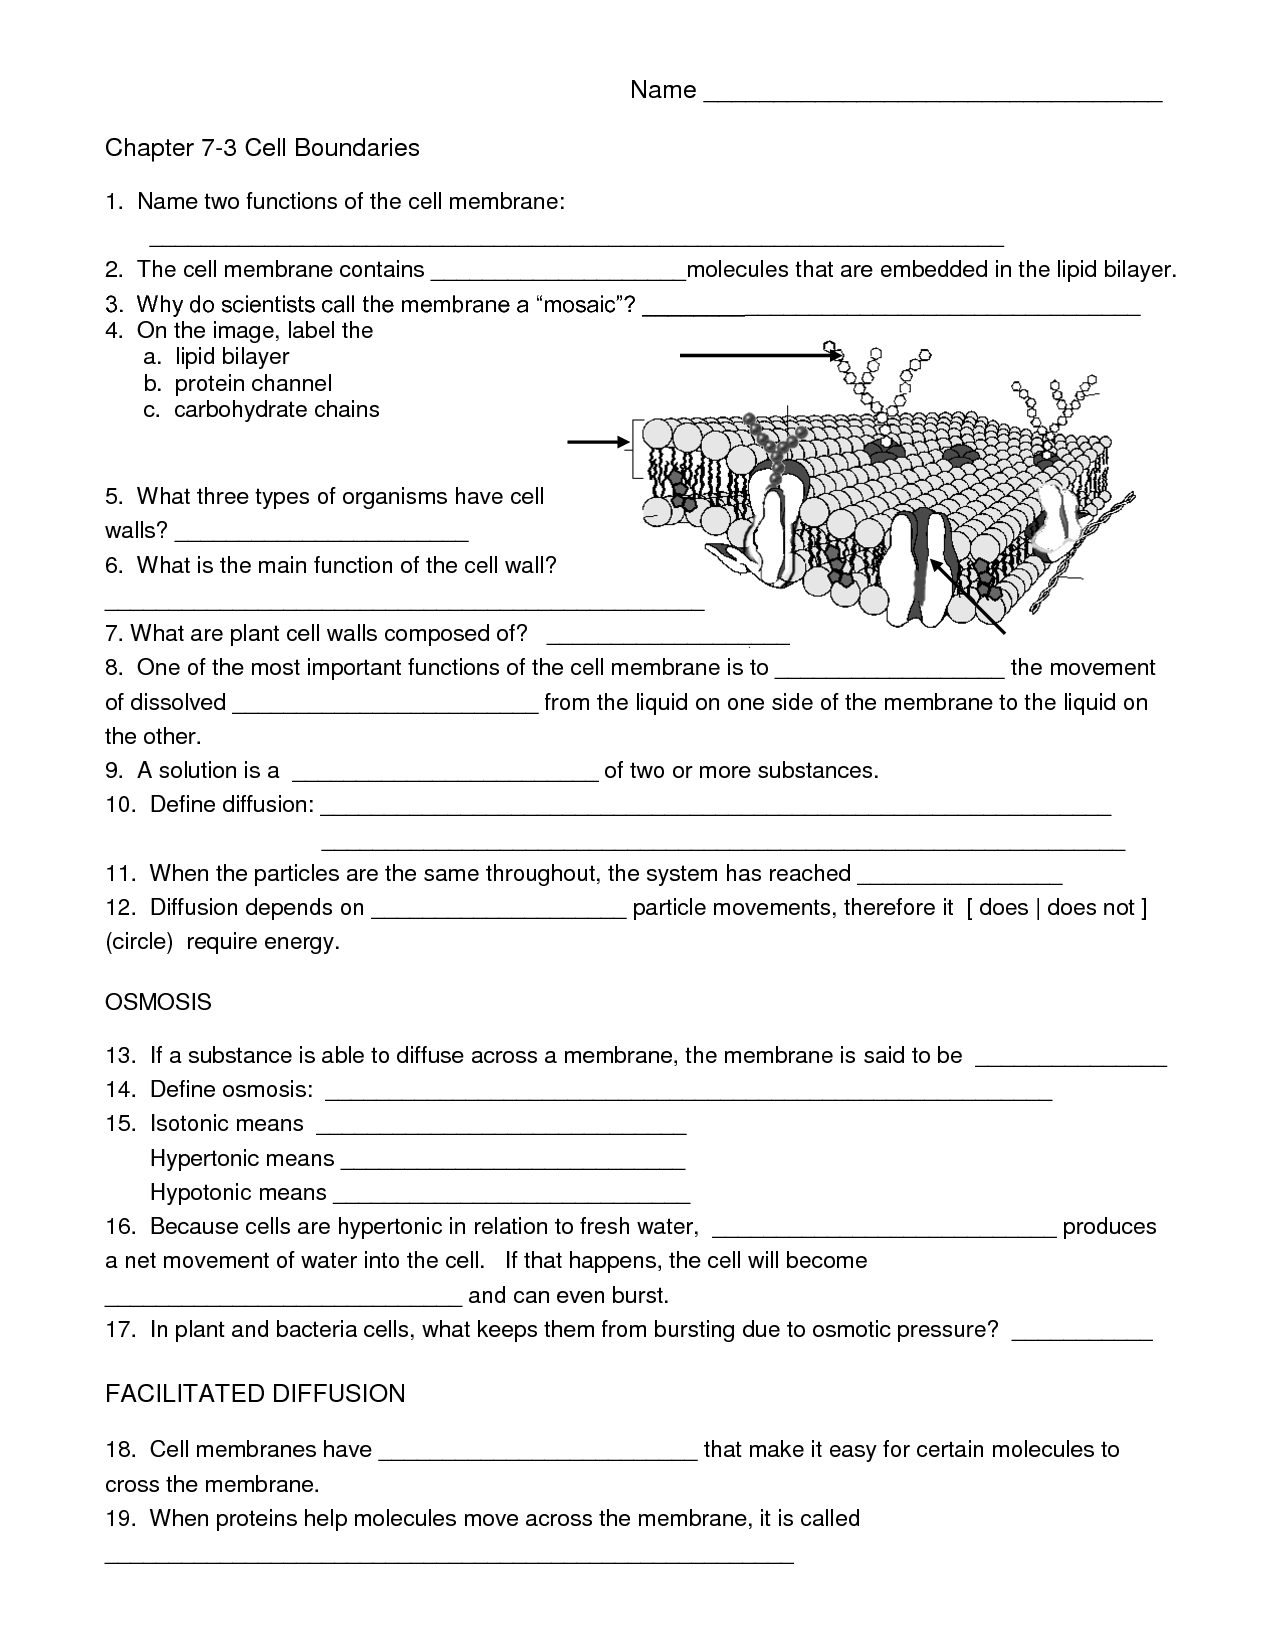 A Cell A Bration Worksheet Answers 109